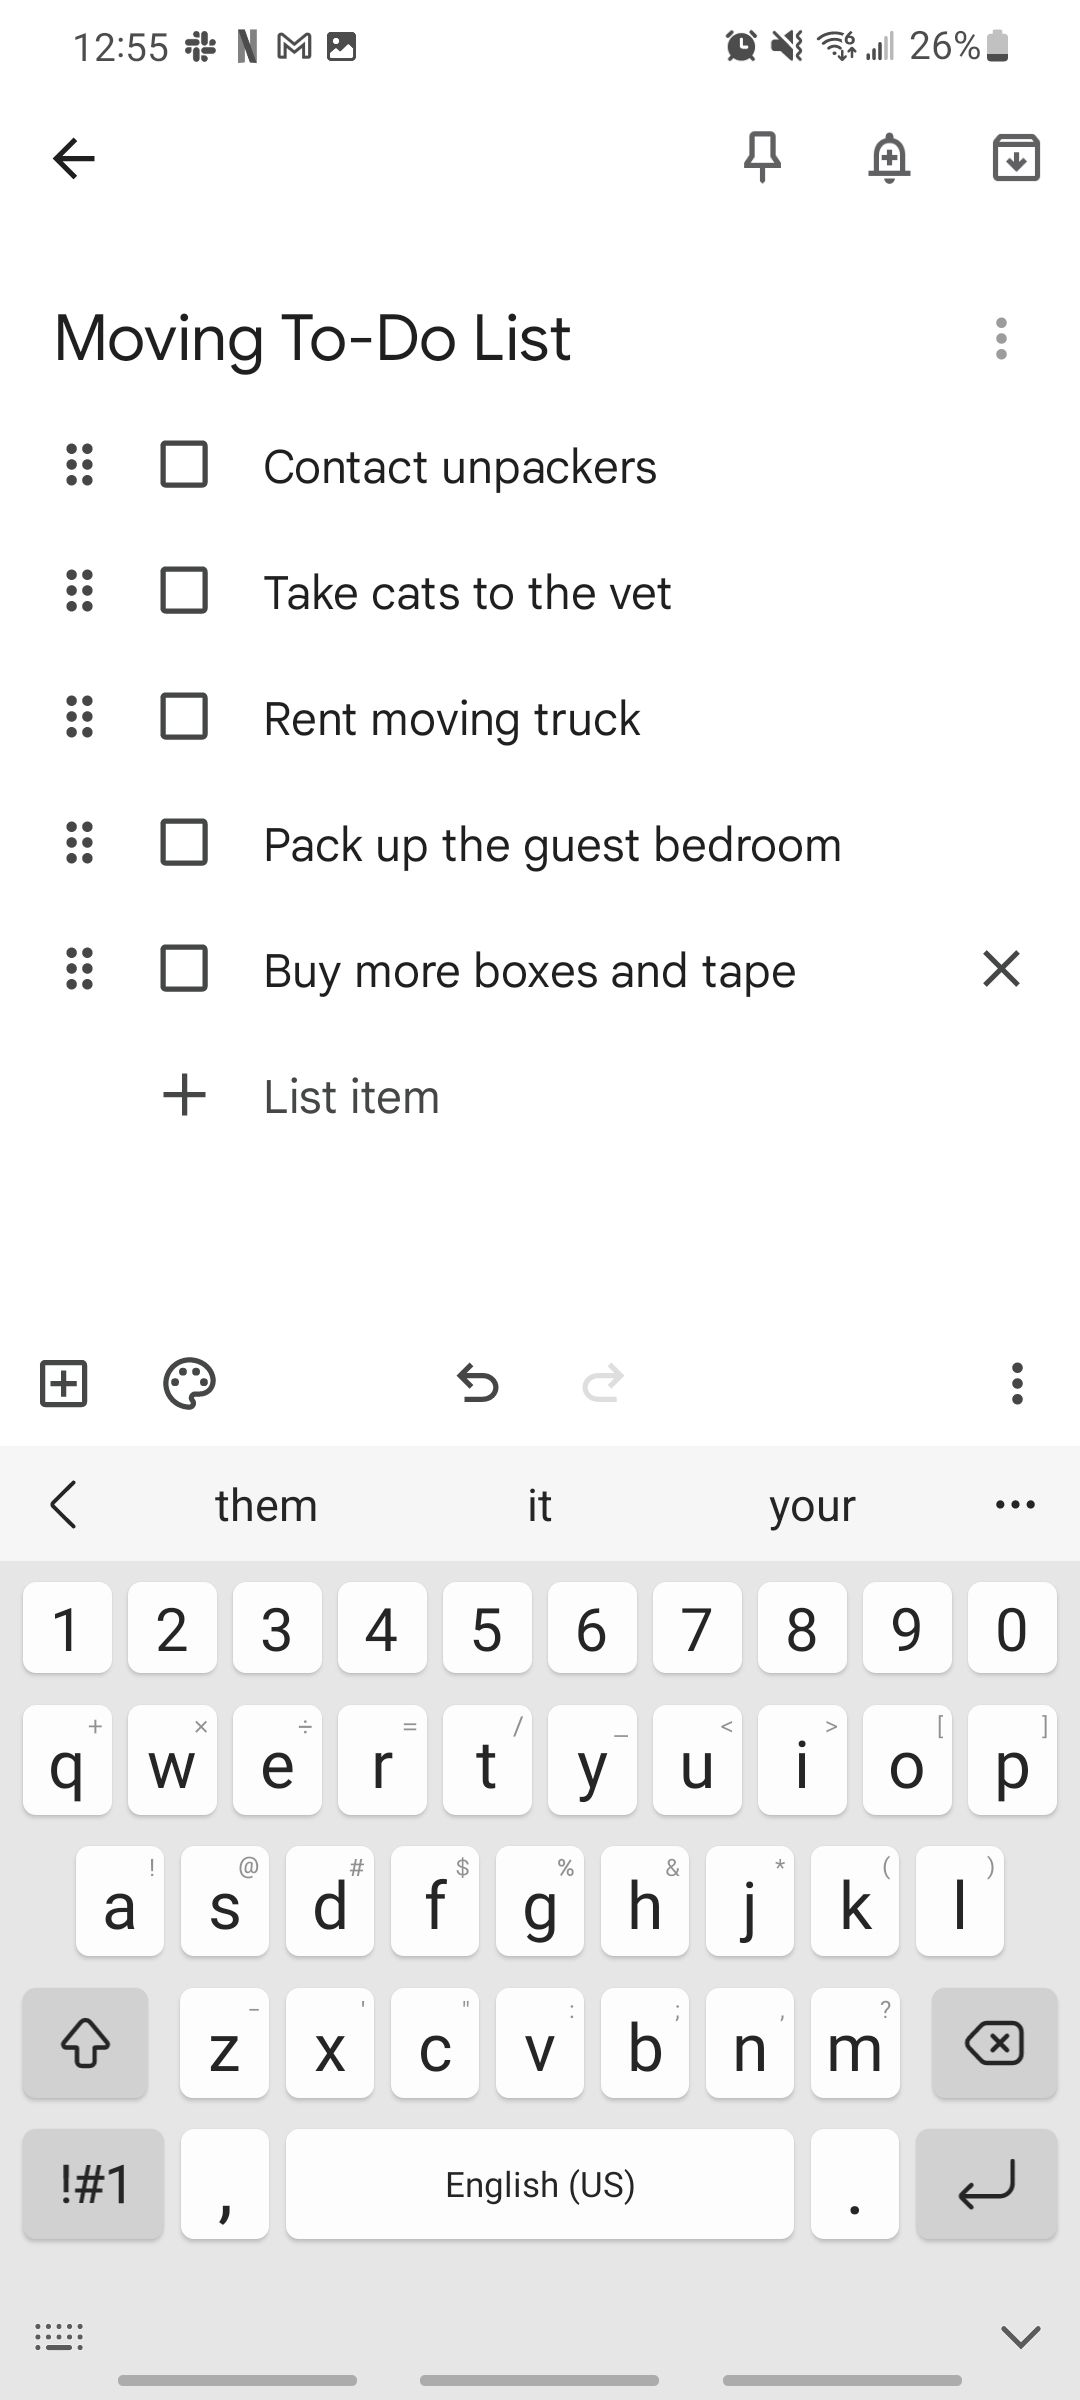 google keep notes app example moving to-do list